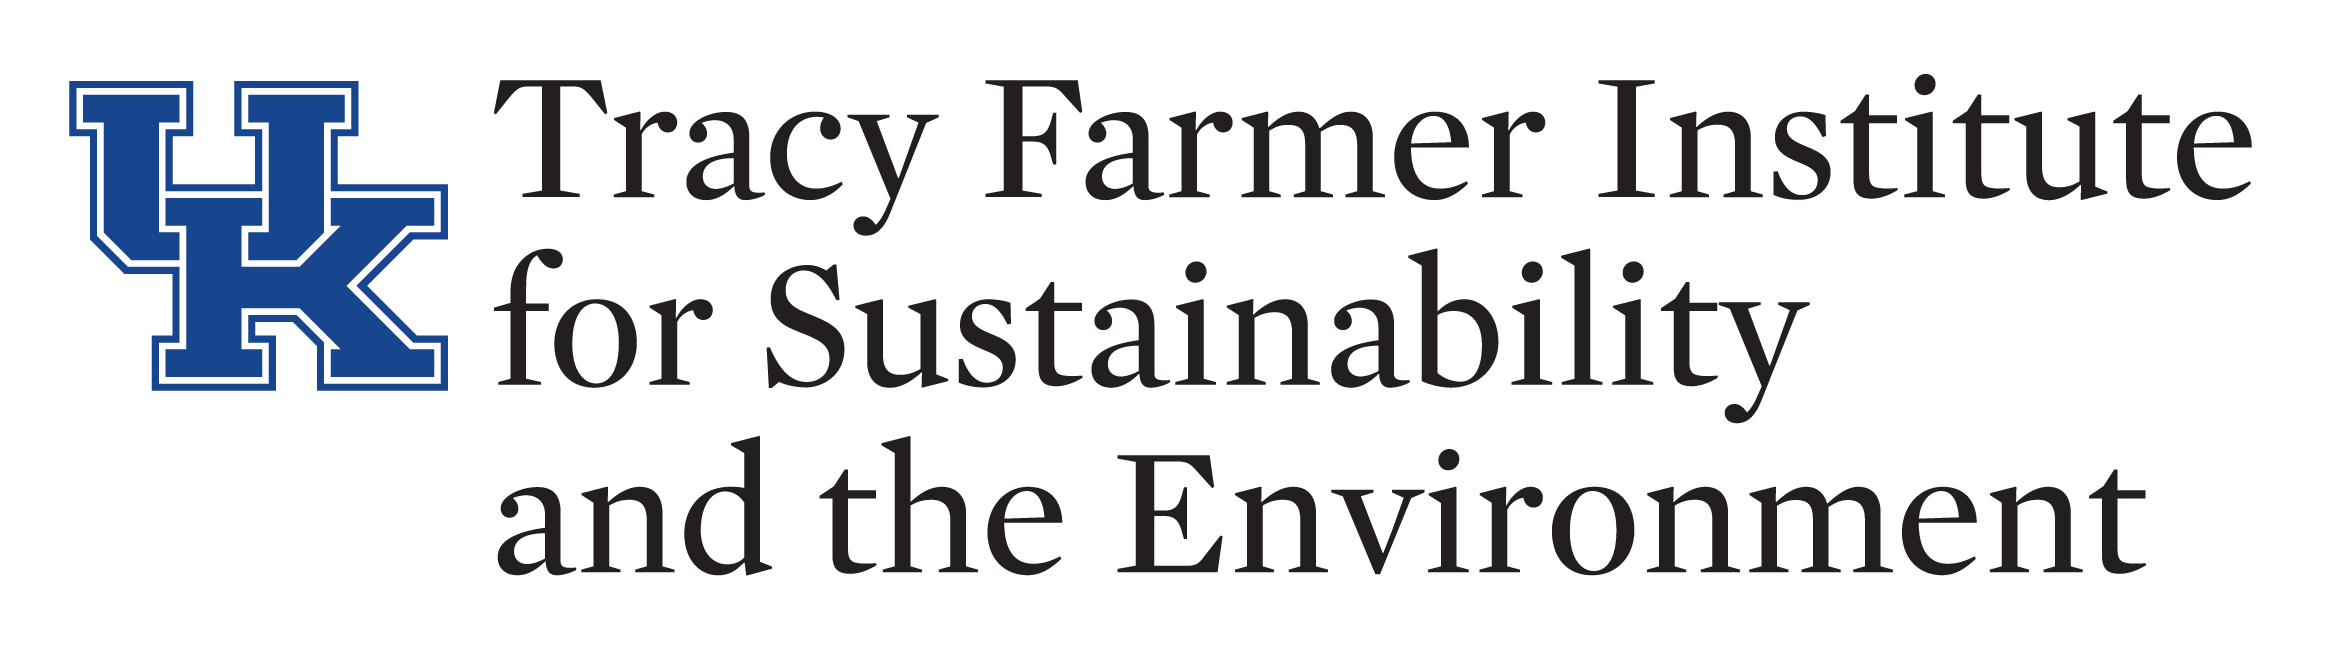 tracy farmer institute for sustainability and the environment